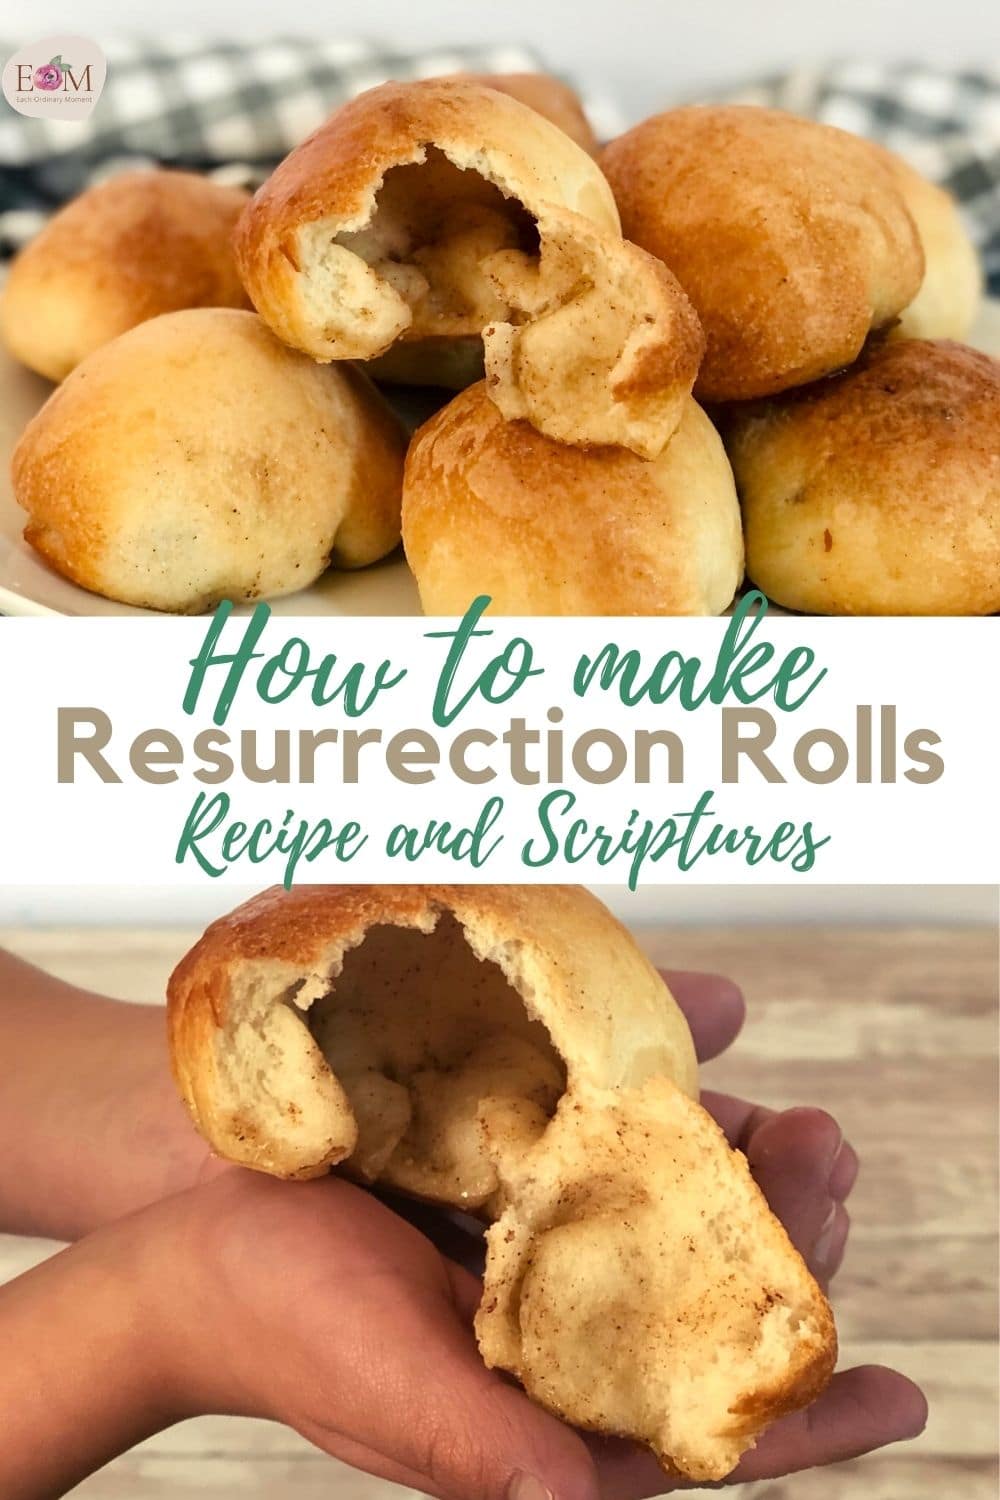 A child holding a Resurrection Roll